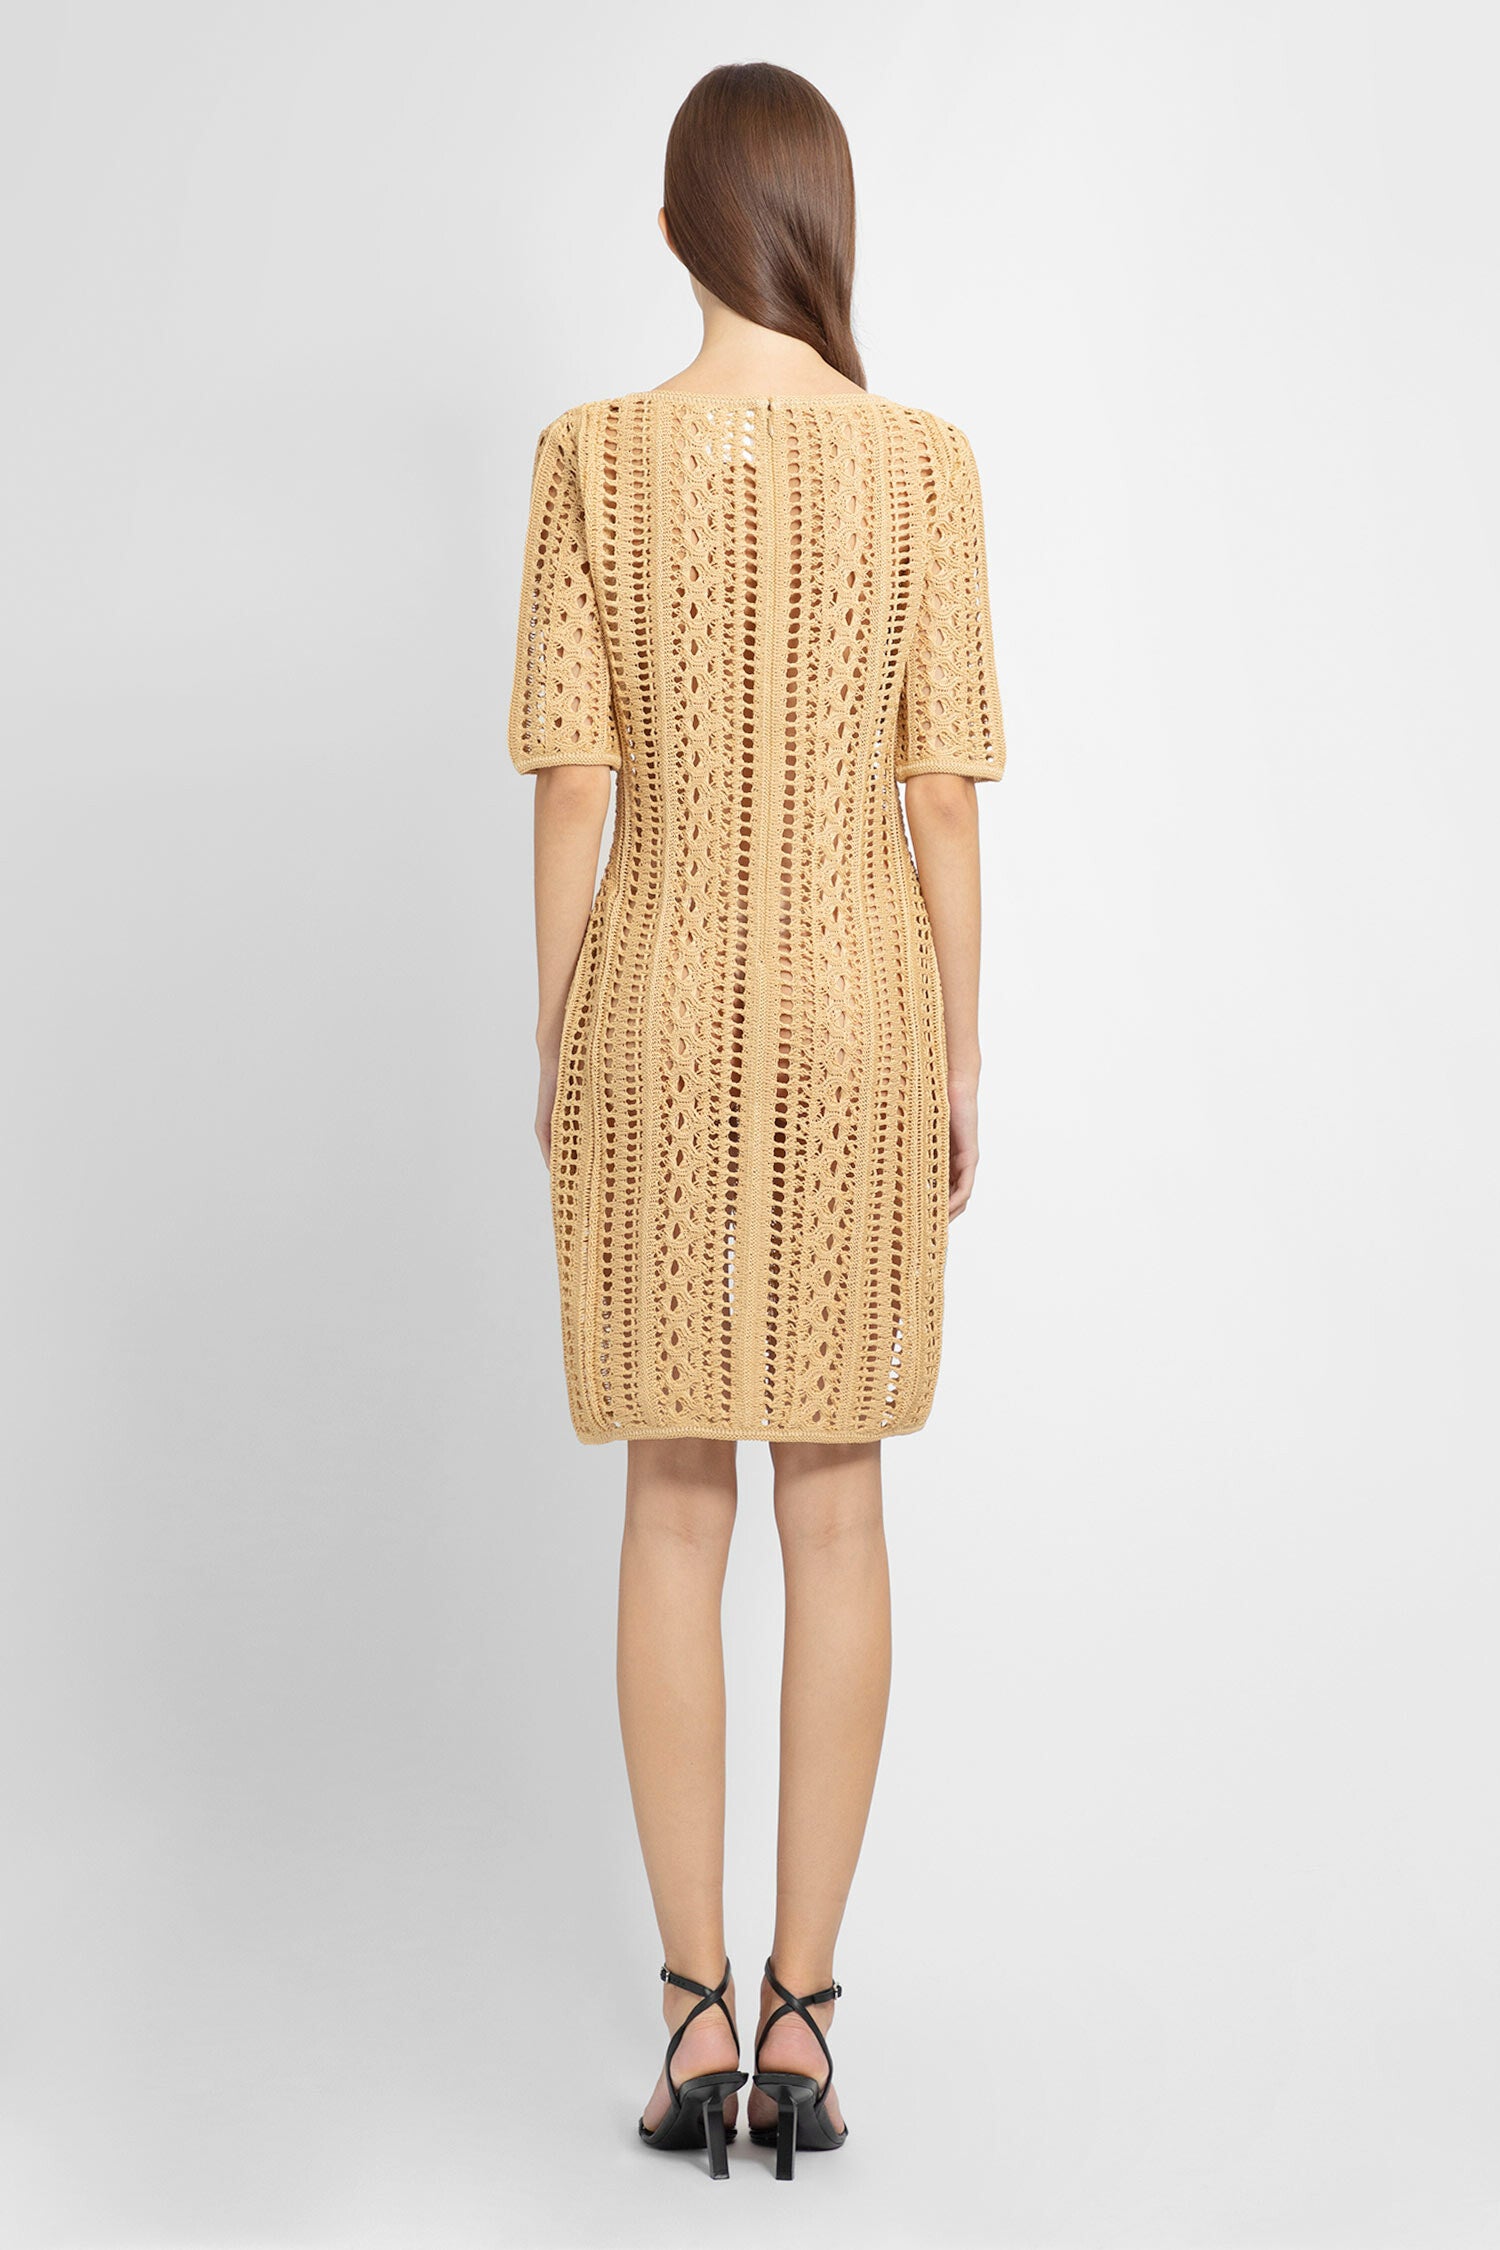 GIVENCHY WOMAN BEIGE DRESSES